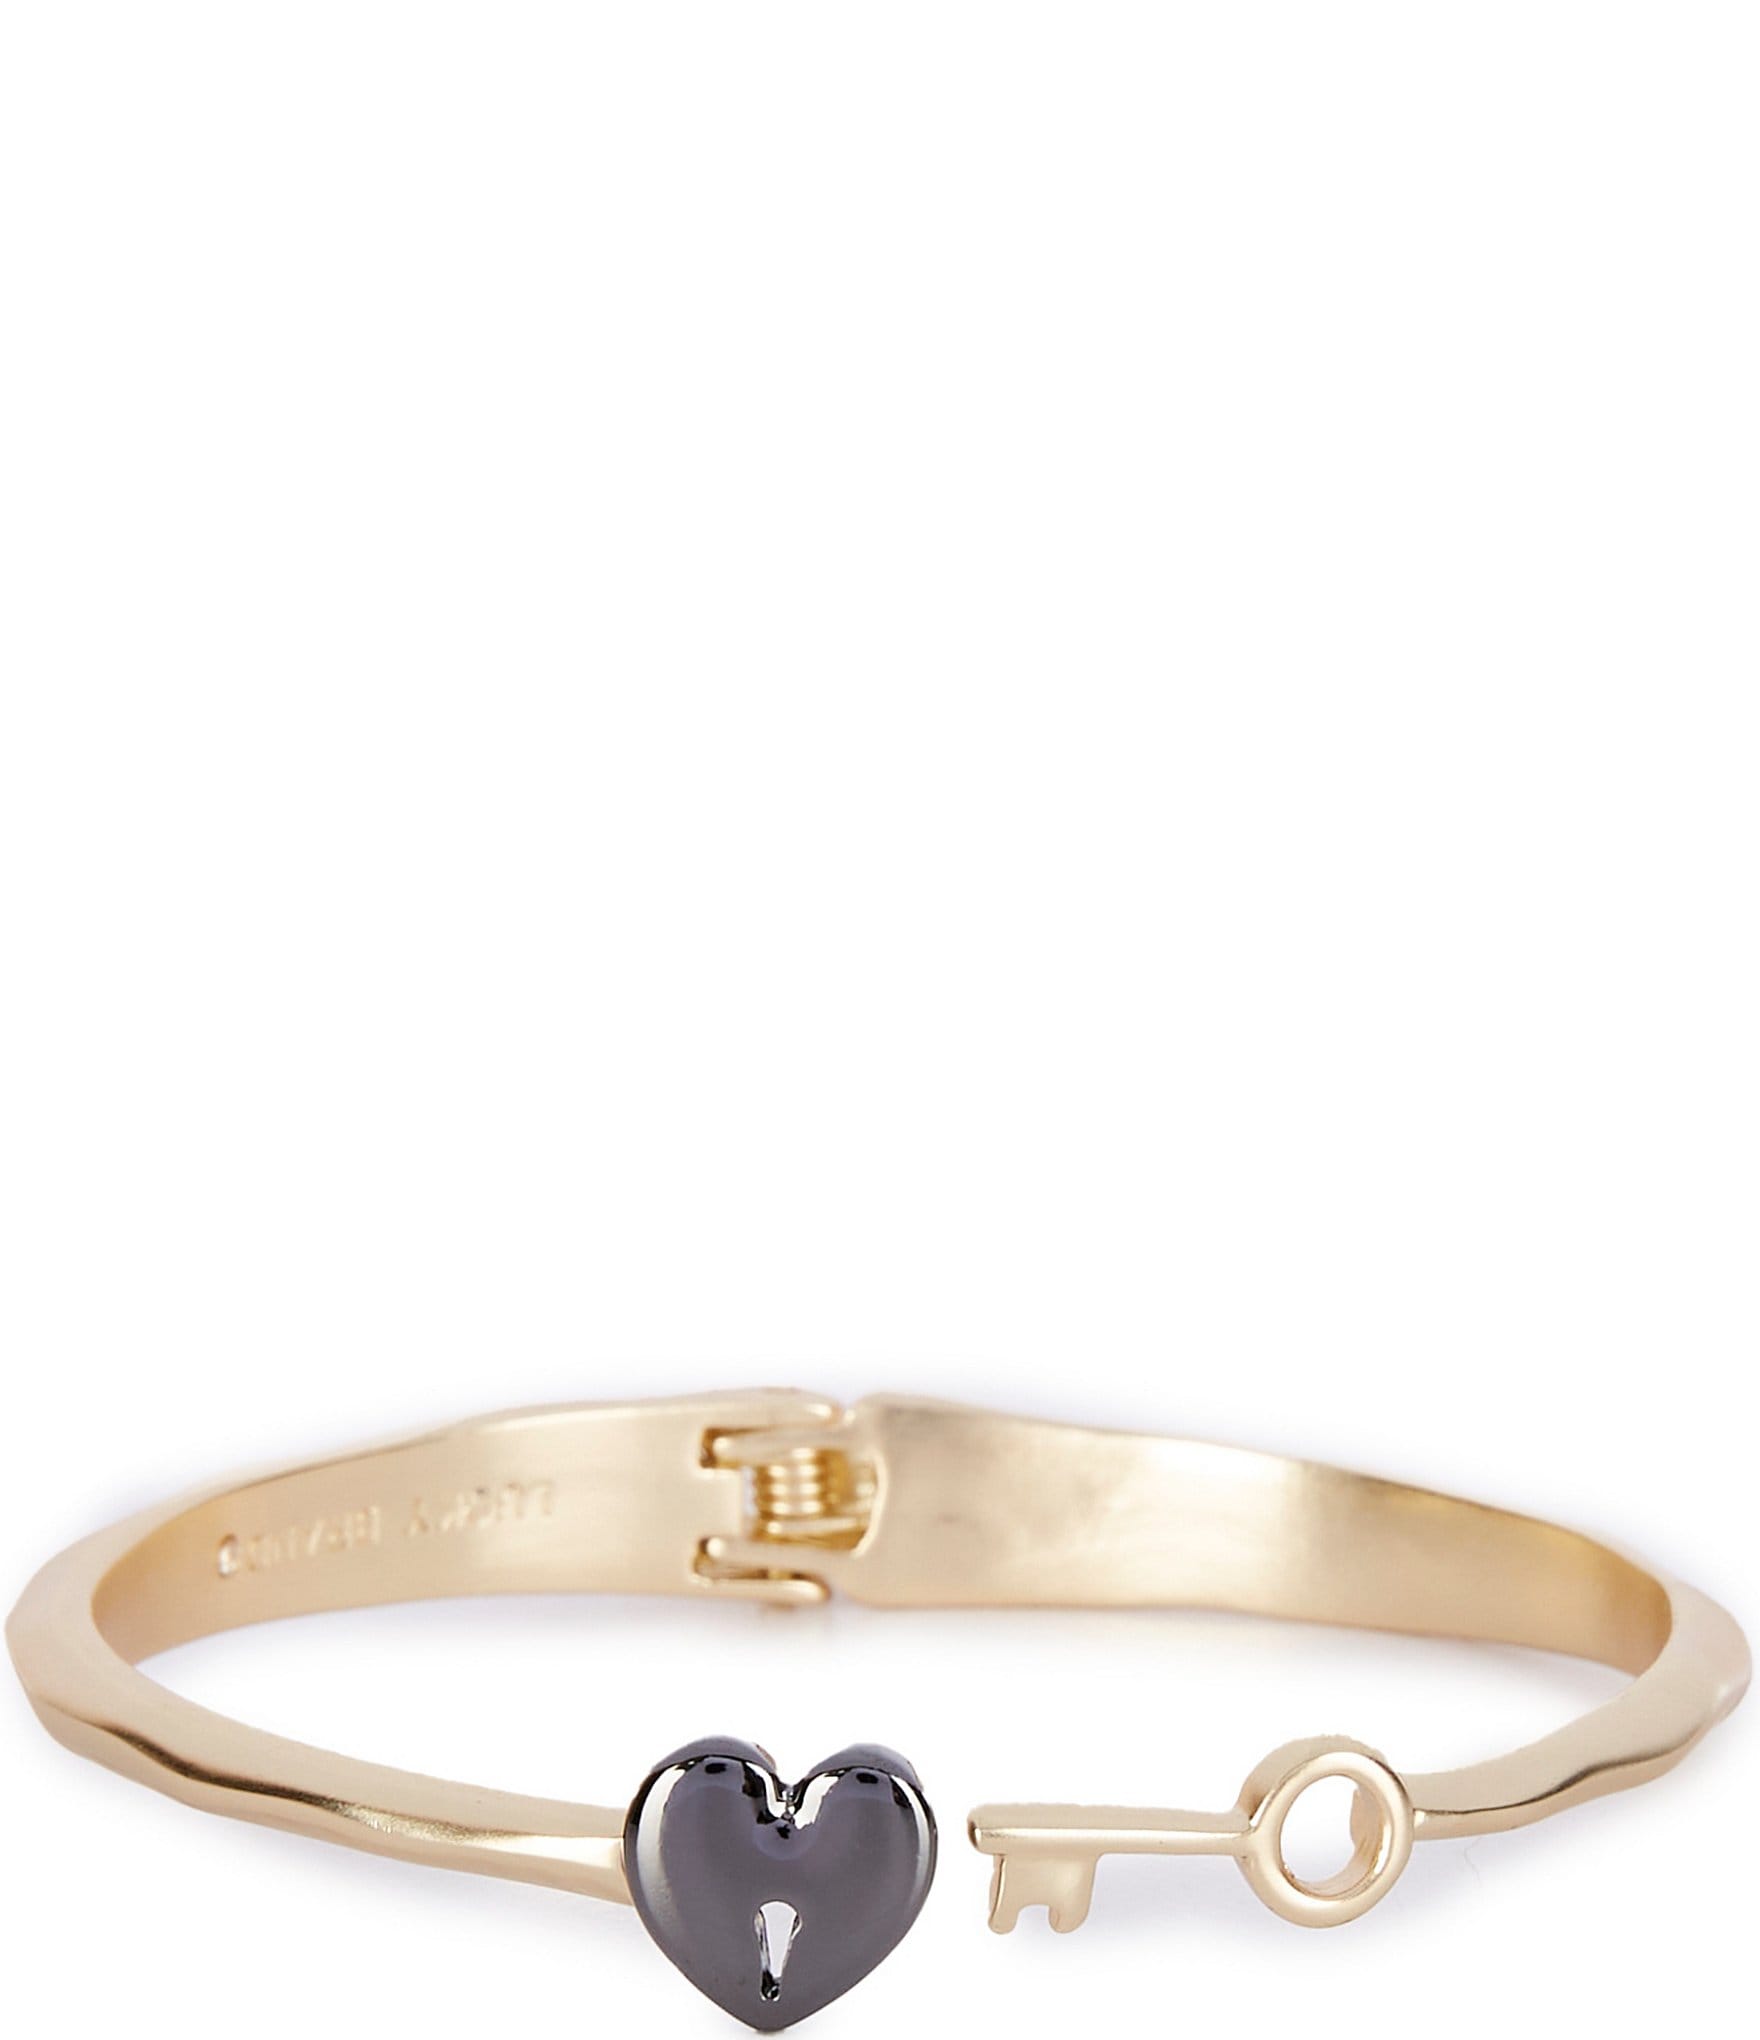 Lucky Brand Bee Hinge Cuff Bracelet, Gold, One Size